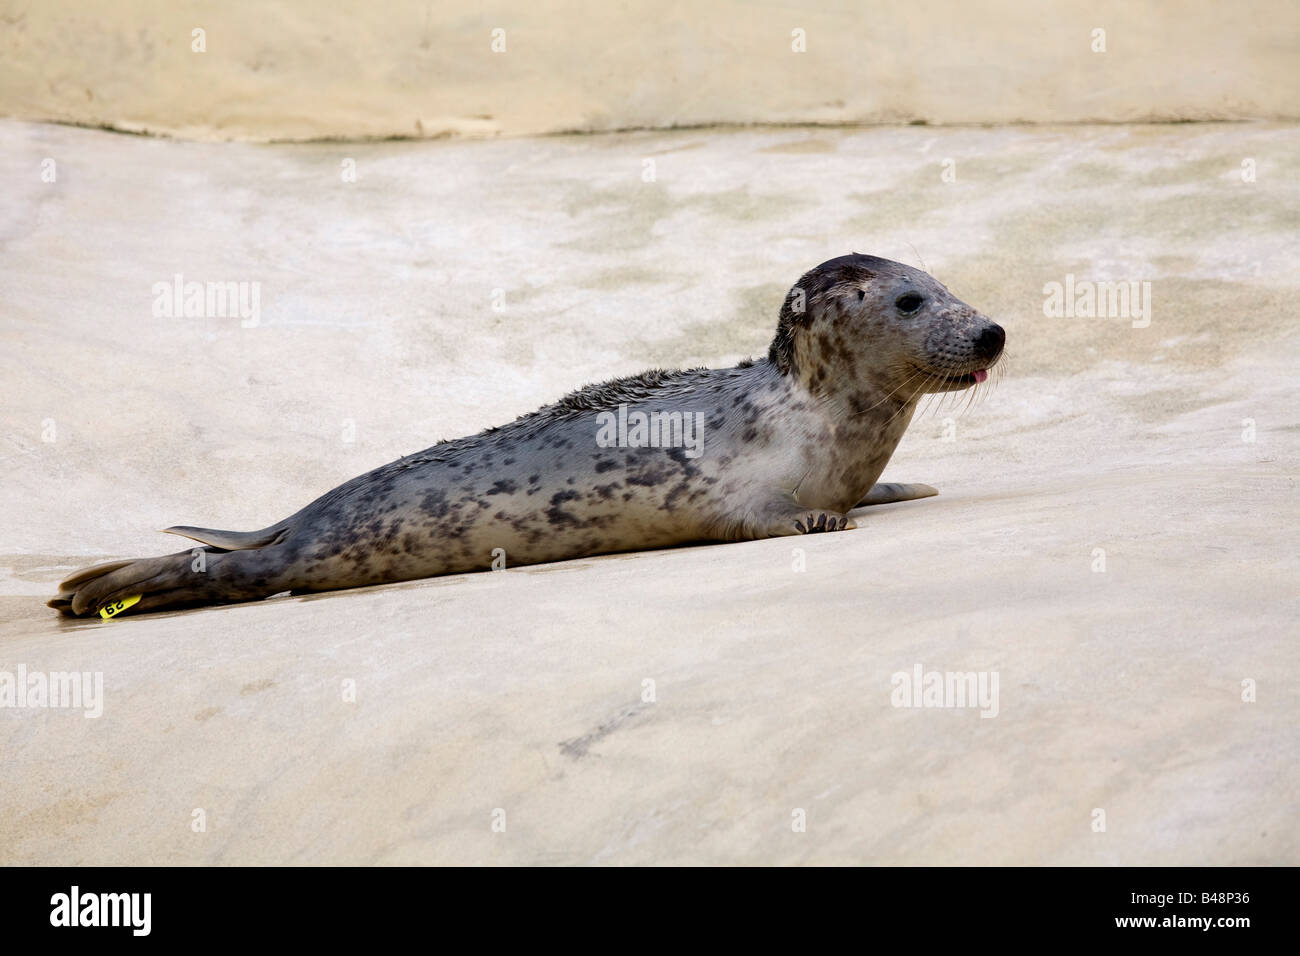 april a grey seal pup Halichoerus grypus rescued at the national seal sanctuary cornwall Stock Photo